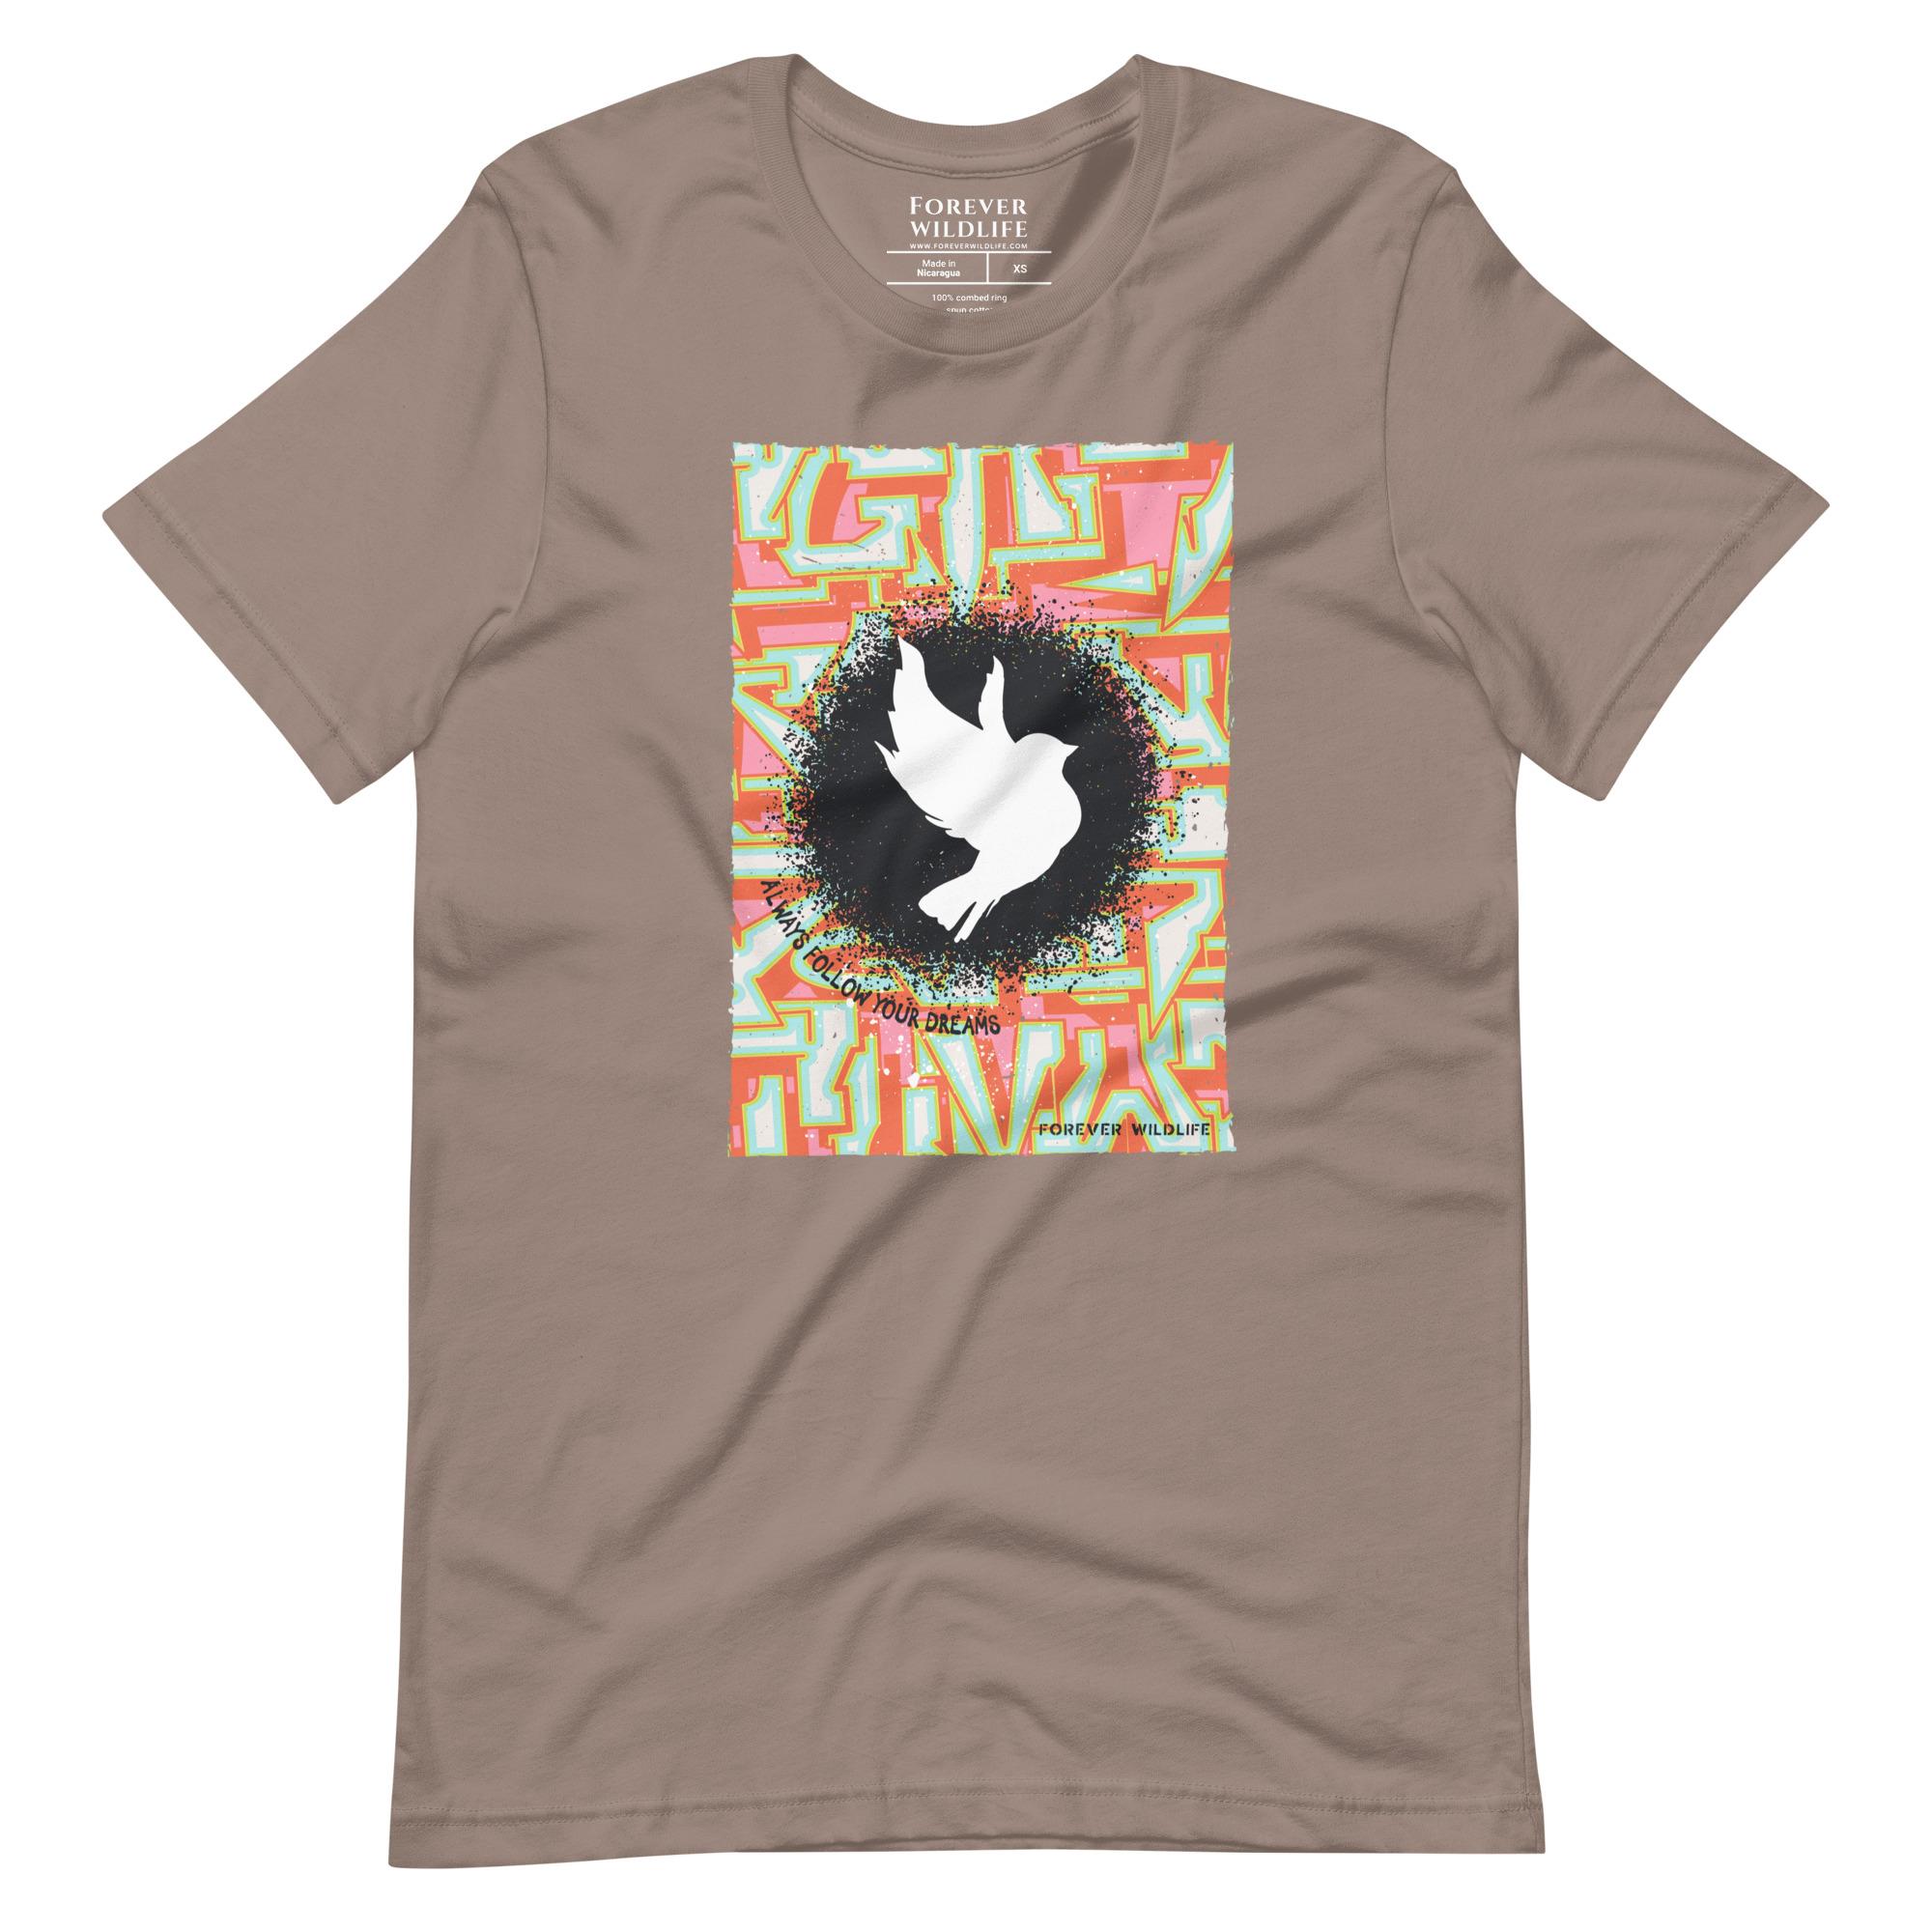 Dove Shirt in Pebble - High-Quality Wildlife Inspirational T-Shirt Design, Wildlife Clothing from Forever Wildlife